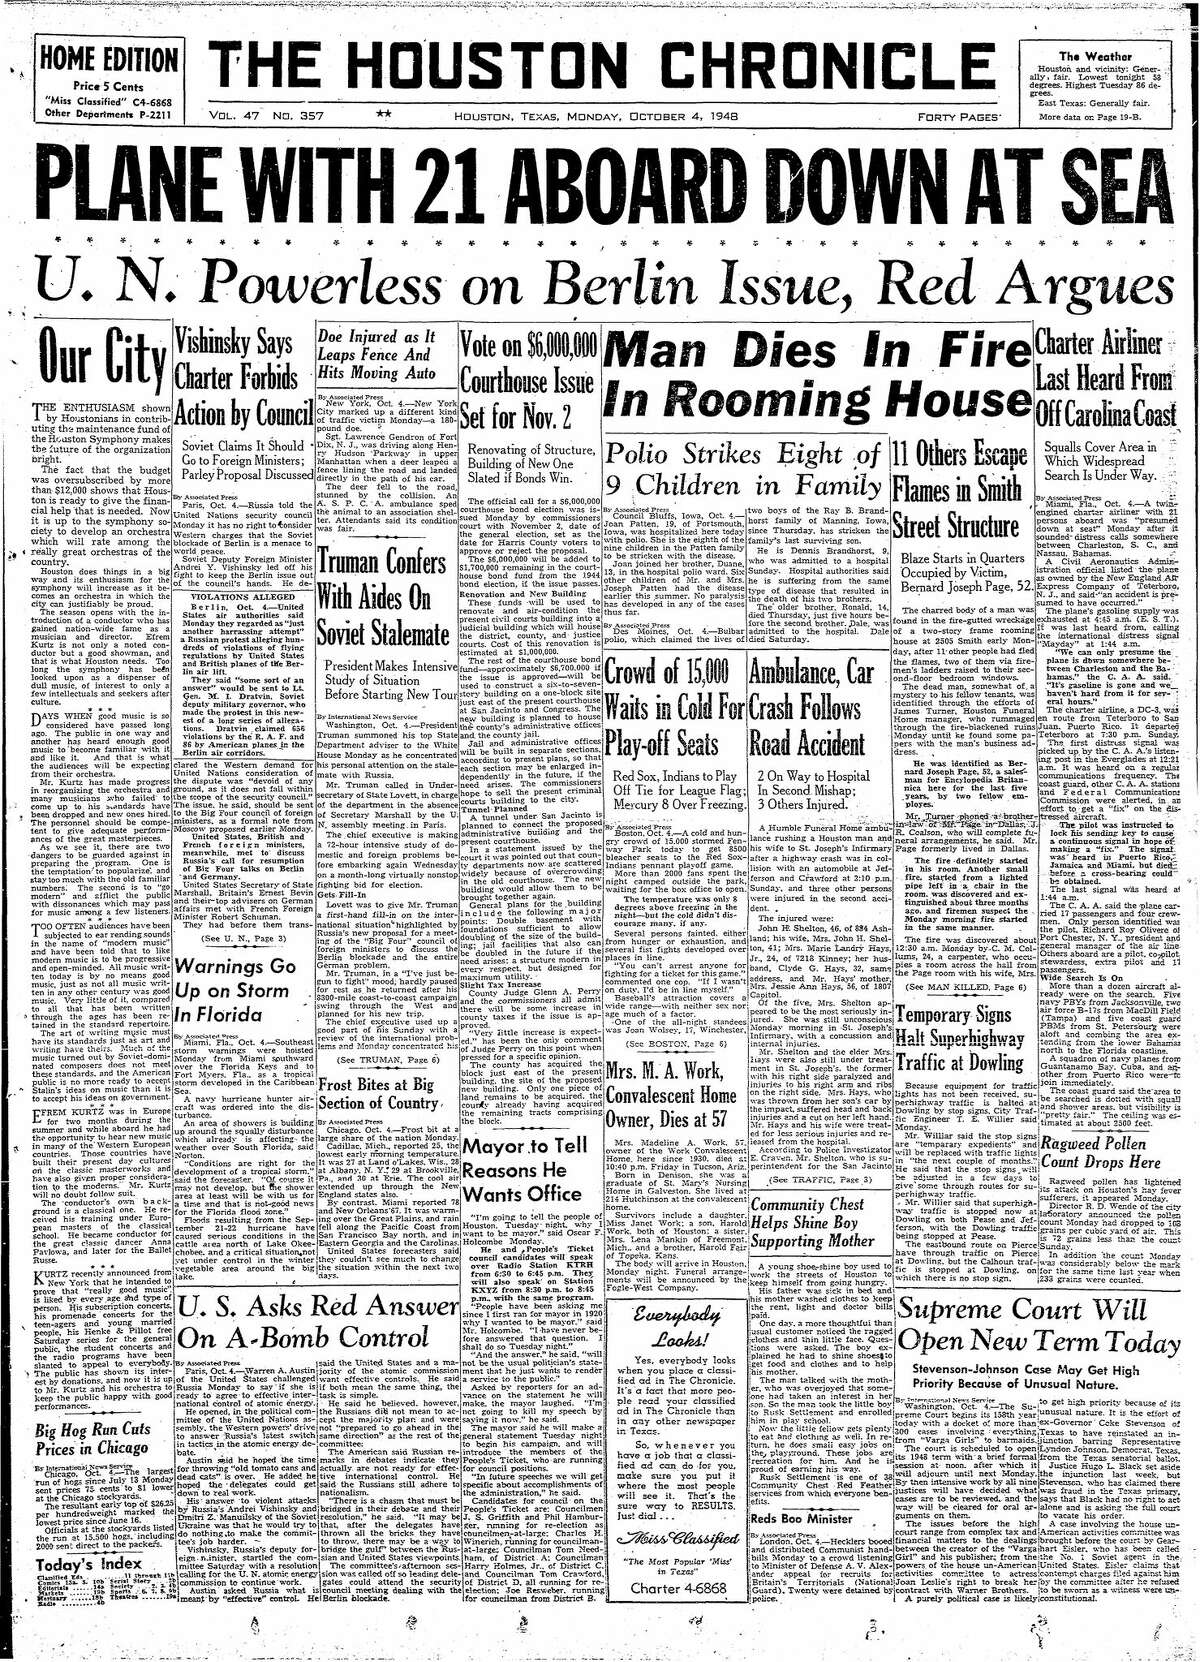 Houston Chronicle front page from Oct. 4, 1948.